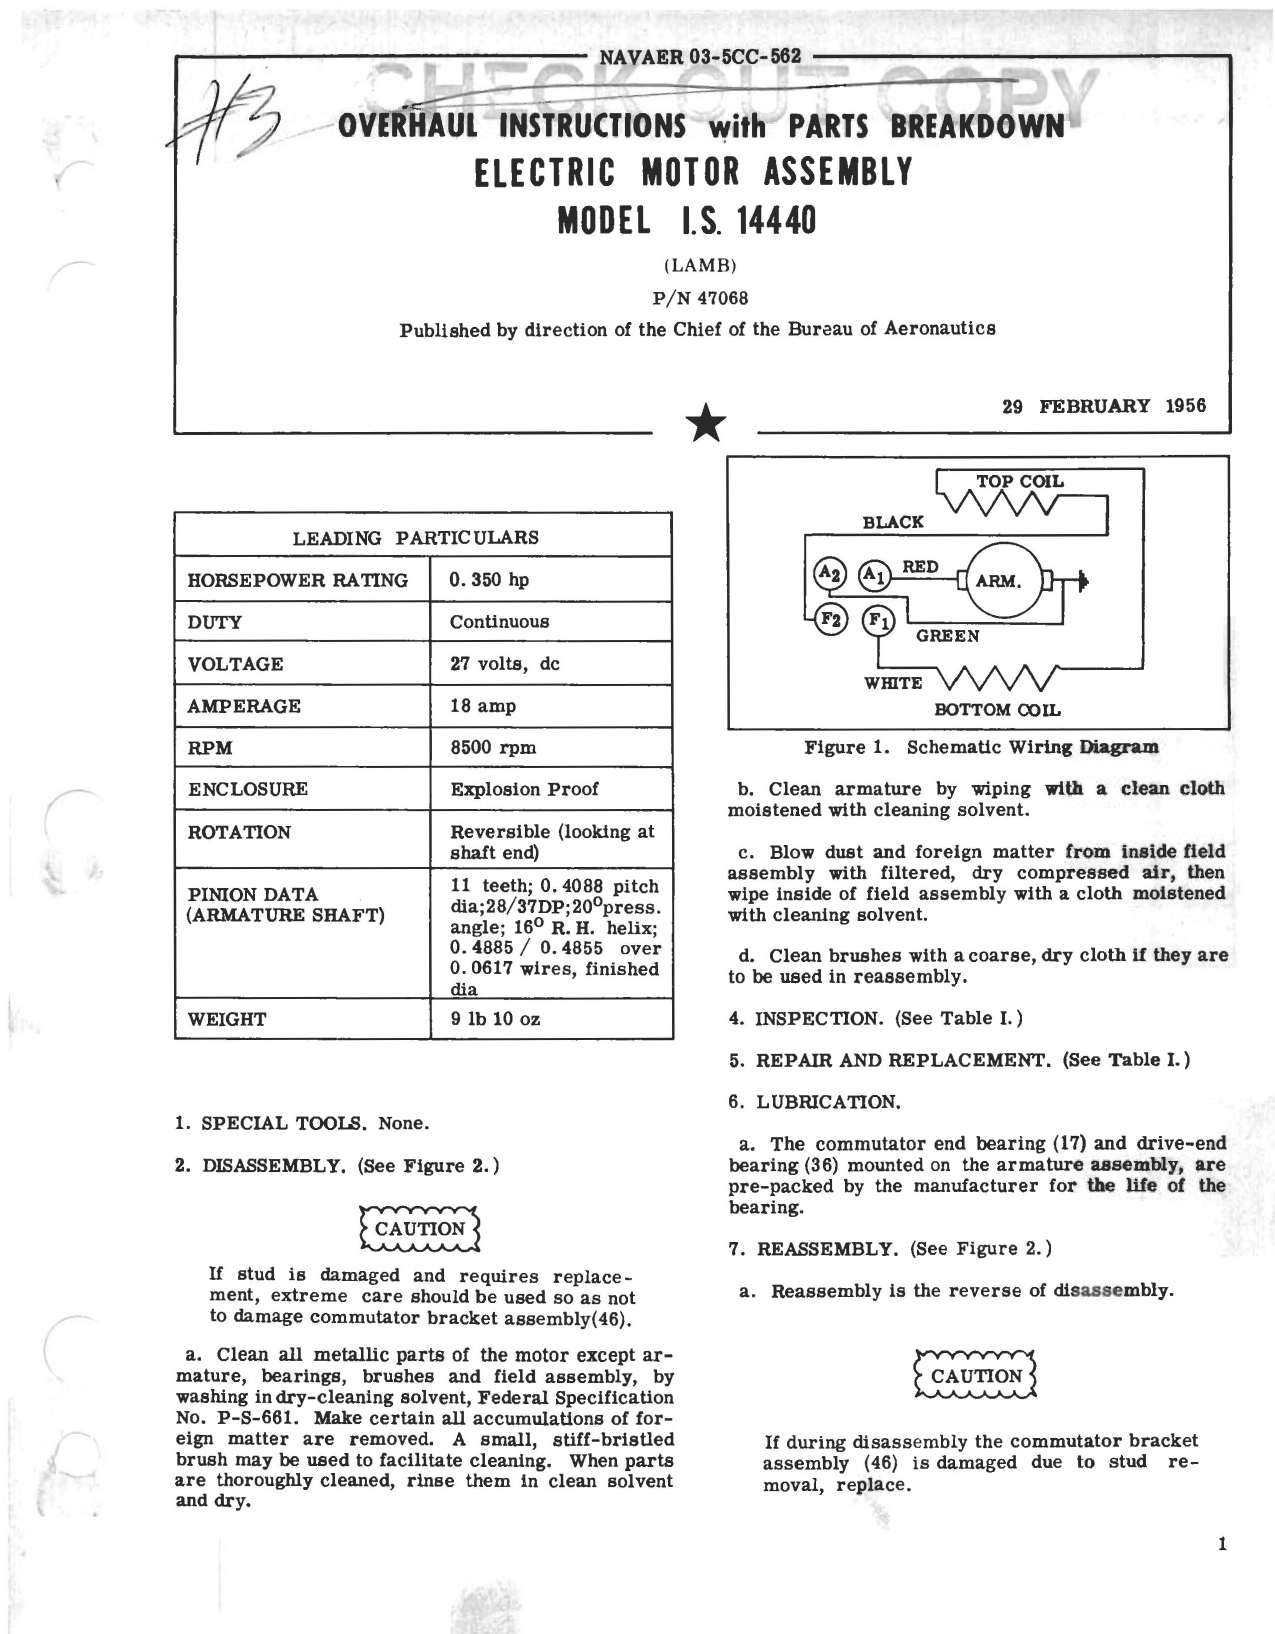 Sample page 1 from AirCorps Library document: Overhaul Instructions with Parts Breakdown for Electric Motor Assembly - Model I.S. 14440 